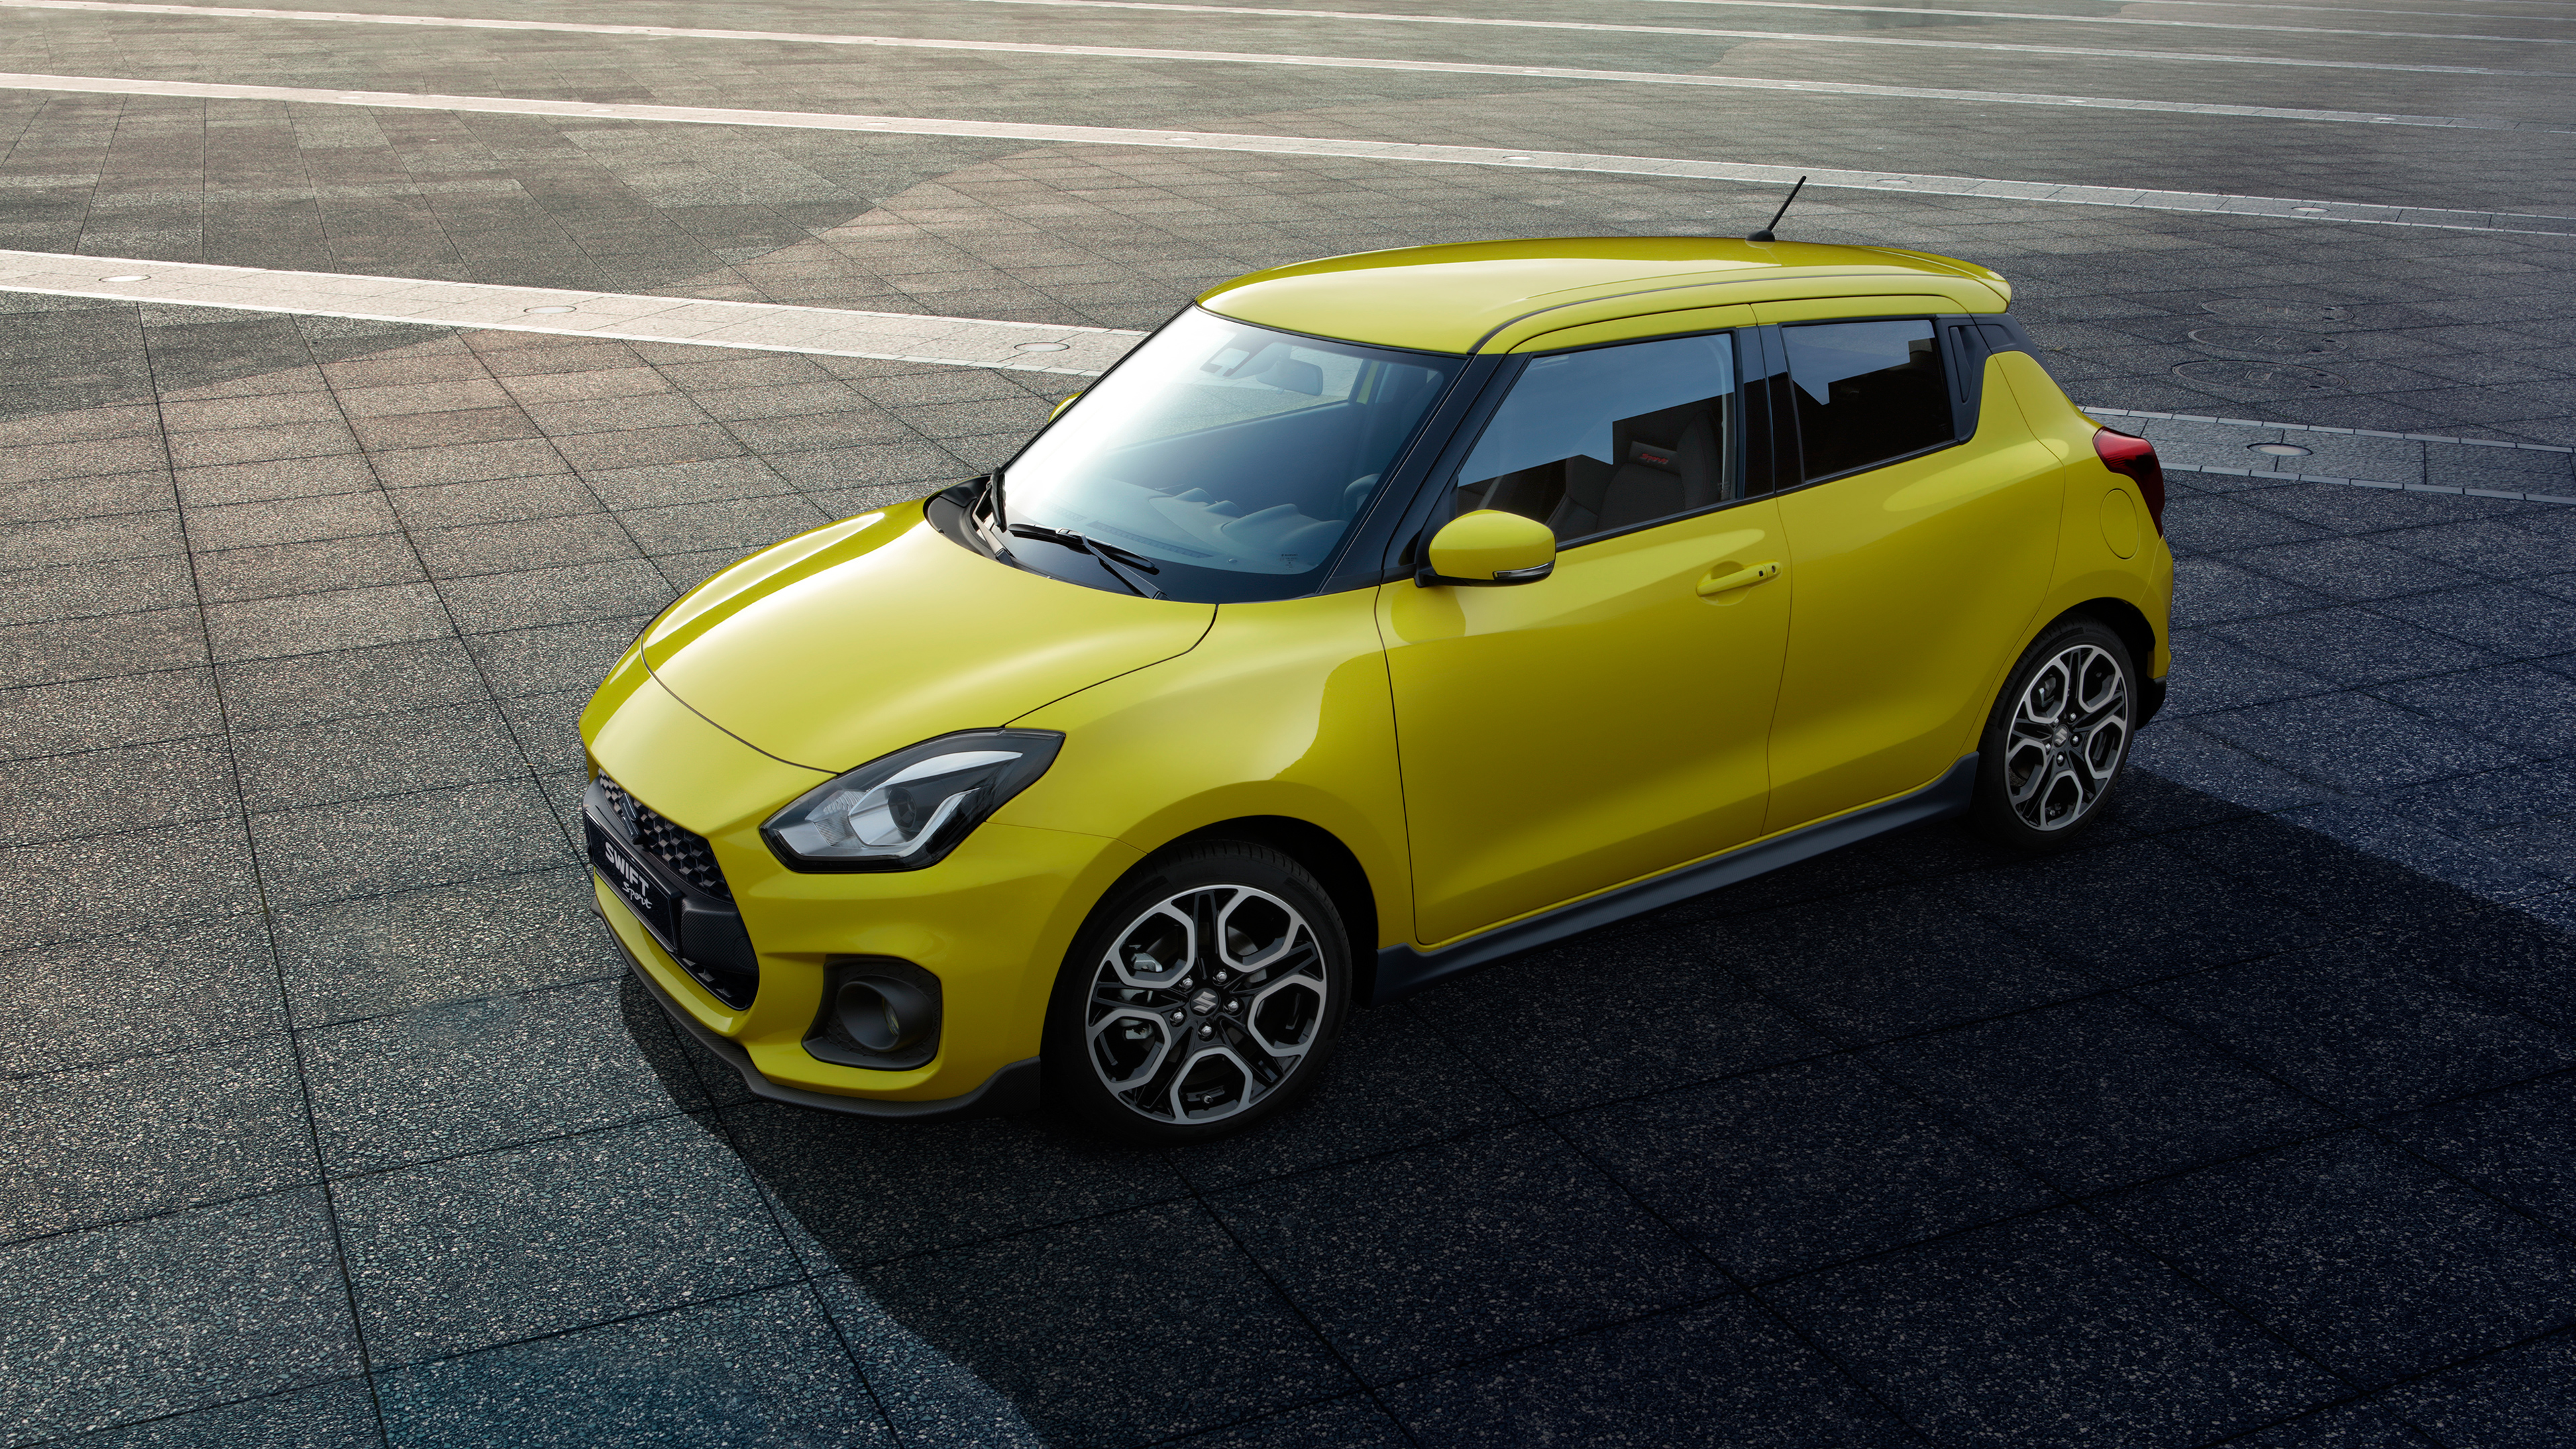 Suzuki Swift HD Wallpapers and Backgrounds